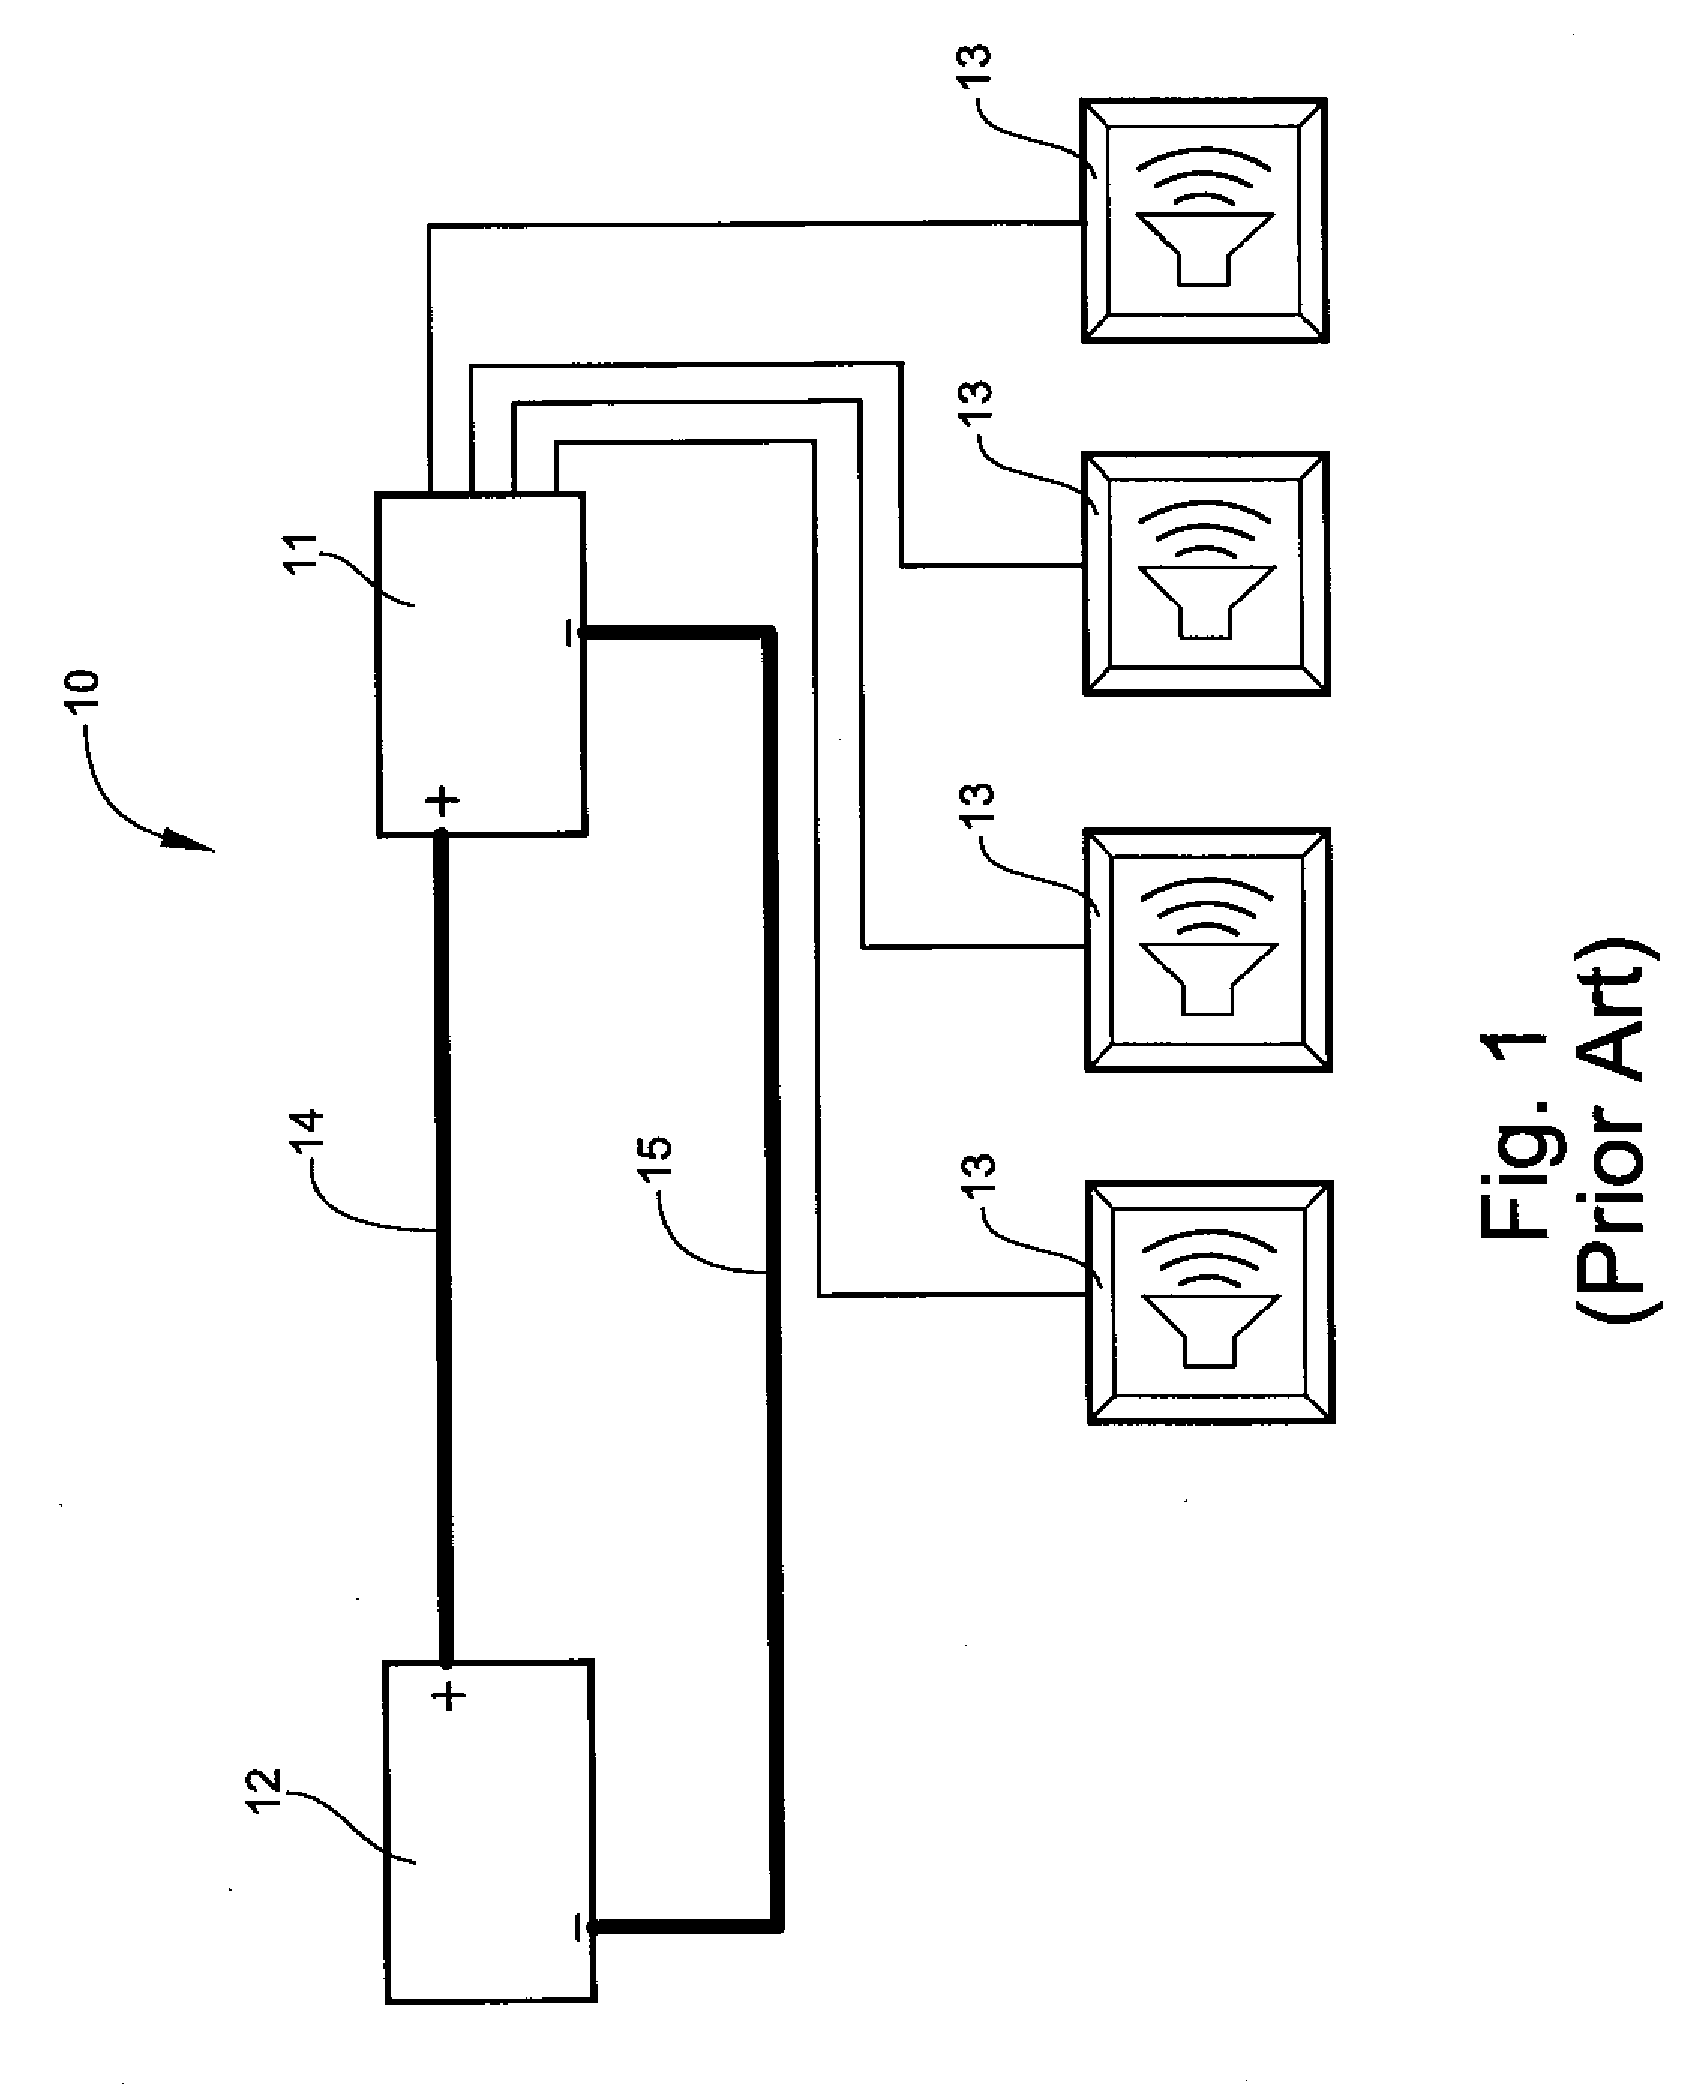 Electrical apparatus with voltage drop indicator